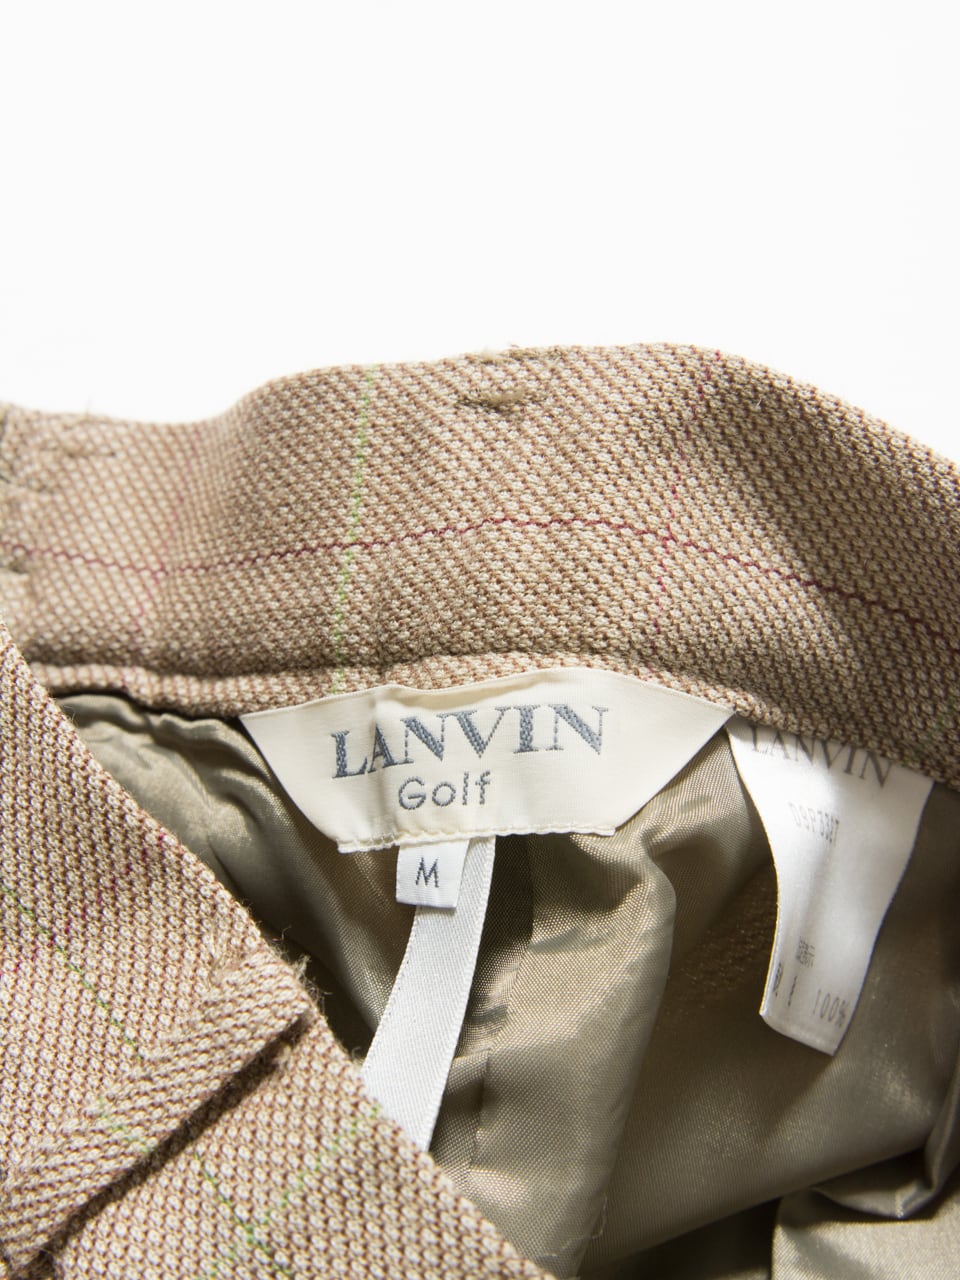 【LANVIN】2tuck sports wool trouser with check patterns（ランバン 2タックチェック柄ウールスラックス）1d